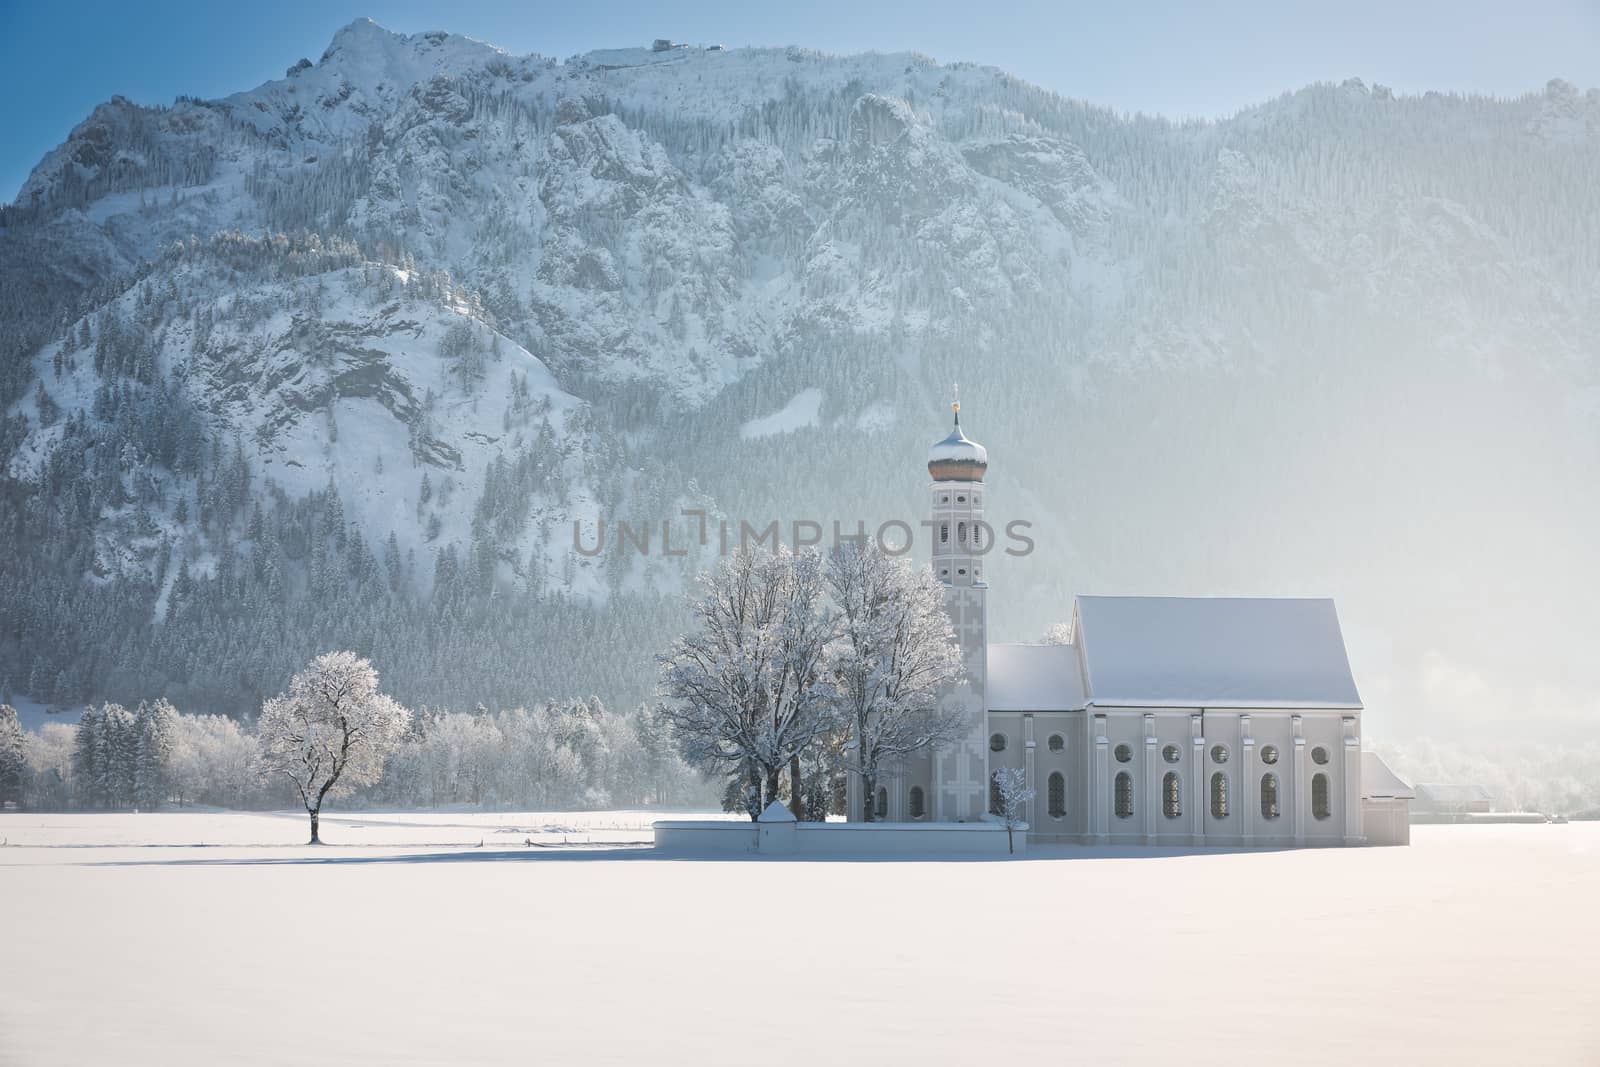 St. Coloman with trees in wintery landscape, Alps, Germany by fisfra